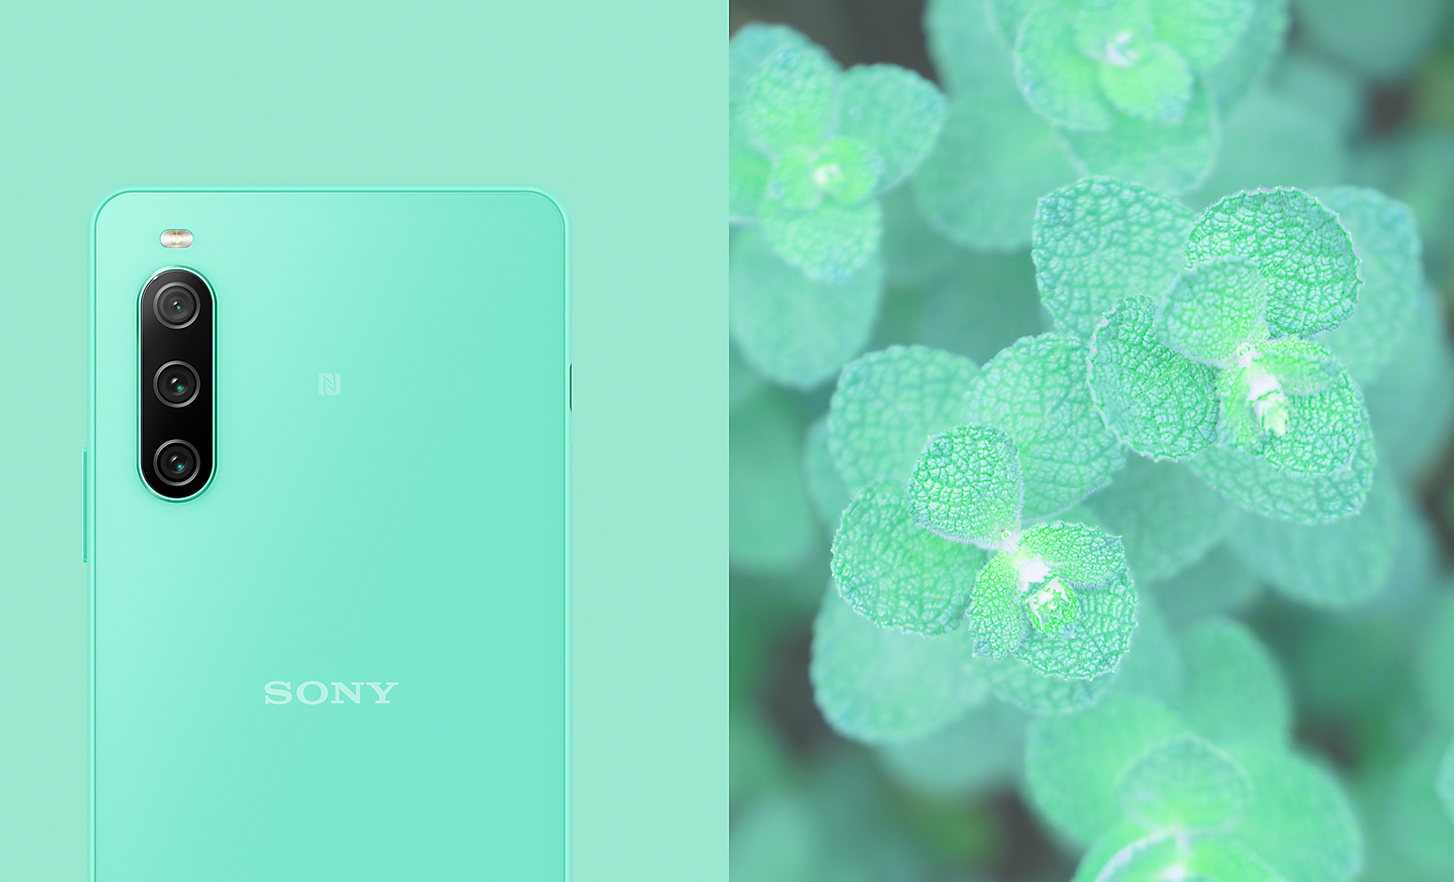 The Xperia 10 IV in mint alongside an image of mint leaves